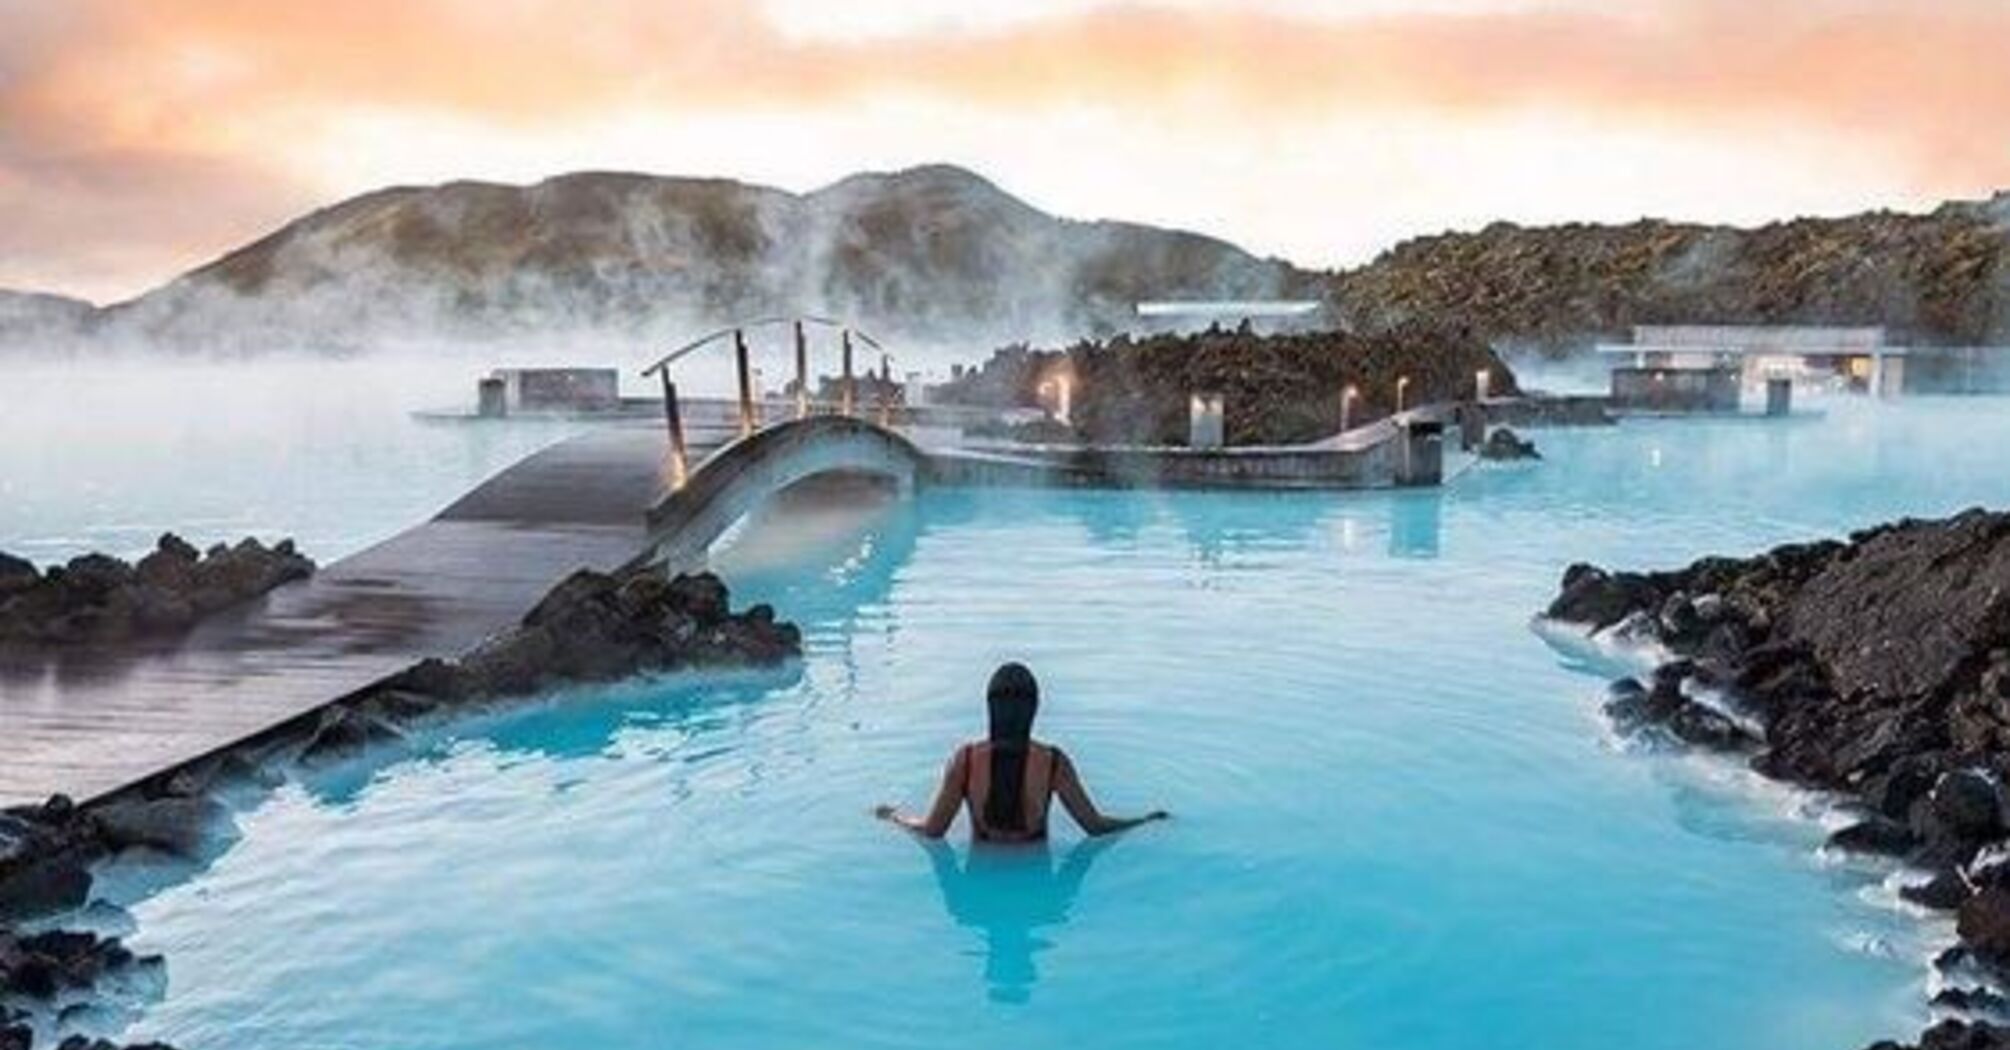 Available again: the Blue Lagoon has reopened in Iceland